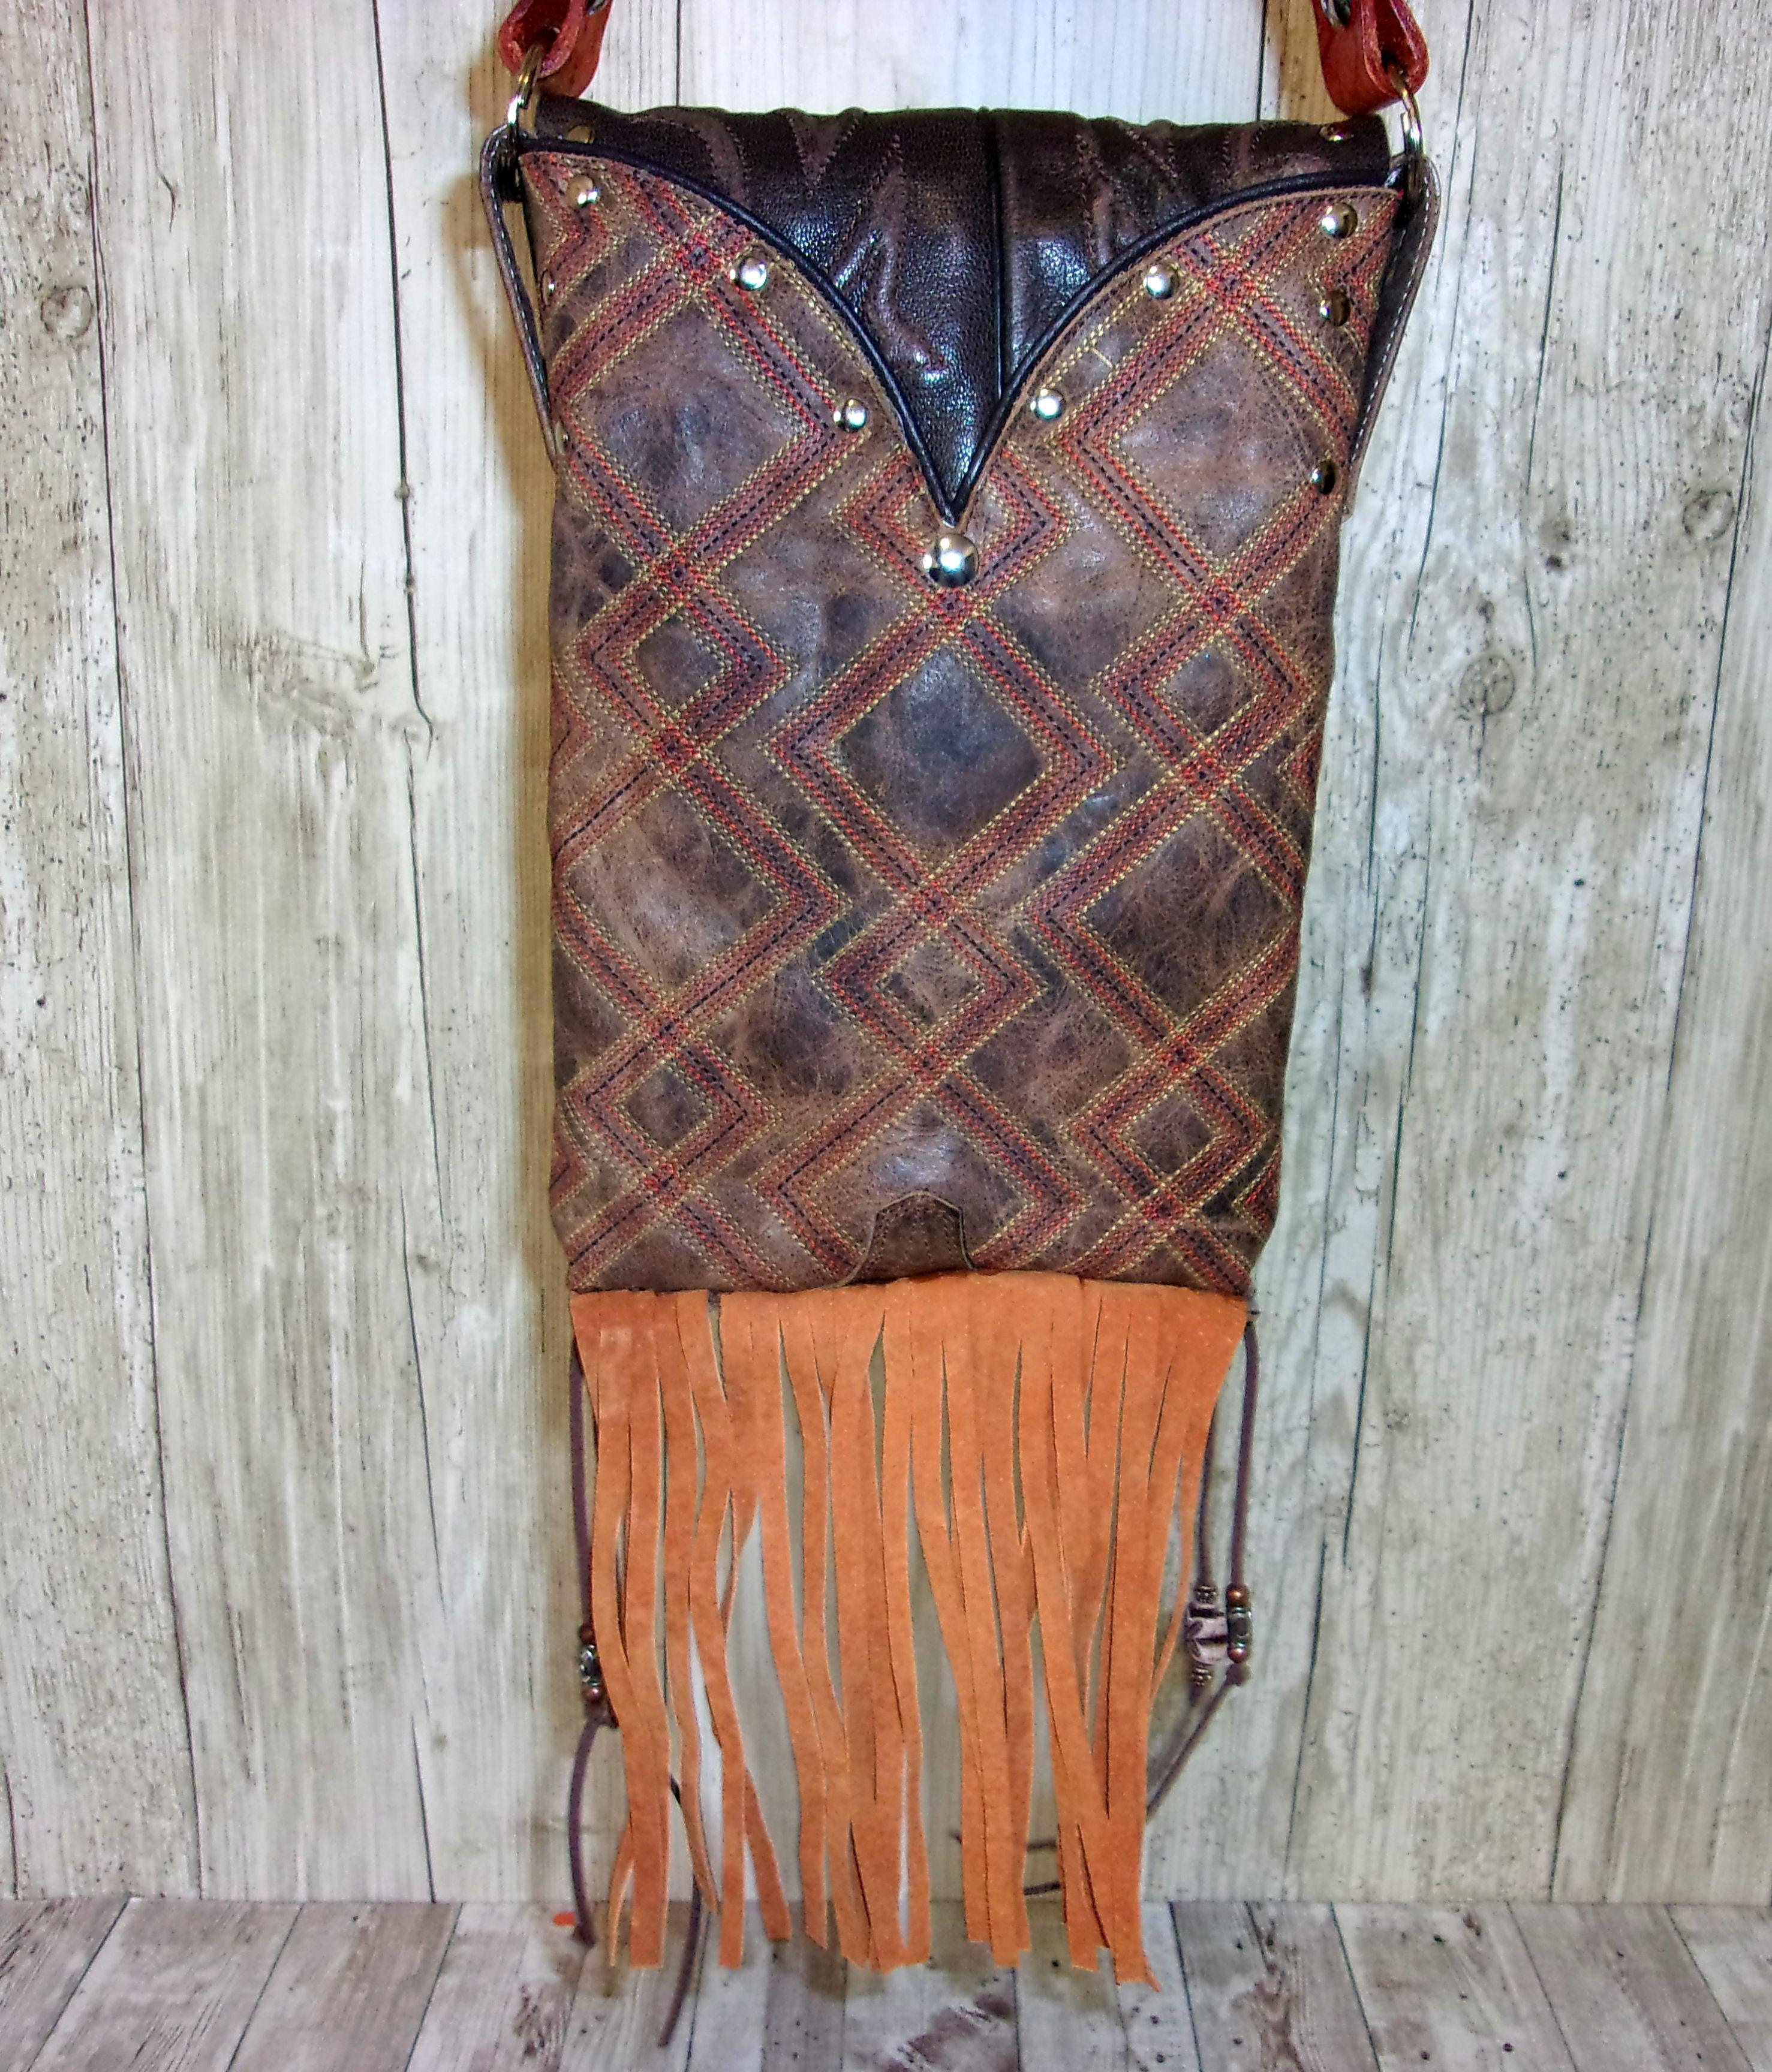 Concealed Carry Purse with Fringe - Cowboy Boot Purse - Crossbody Conceal Carry Purse CB102 cowboy boot purses, western fringe purse, handmade leather purses, boot purse, handmade western purse, custom leather handbags Chris Thompson Bags